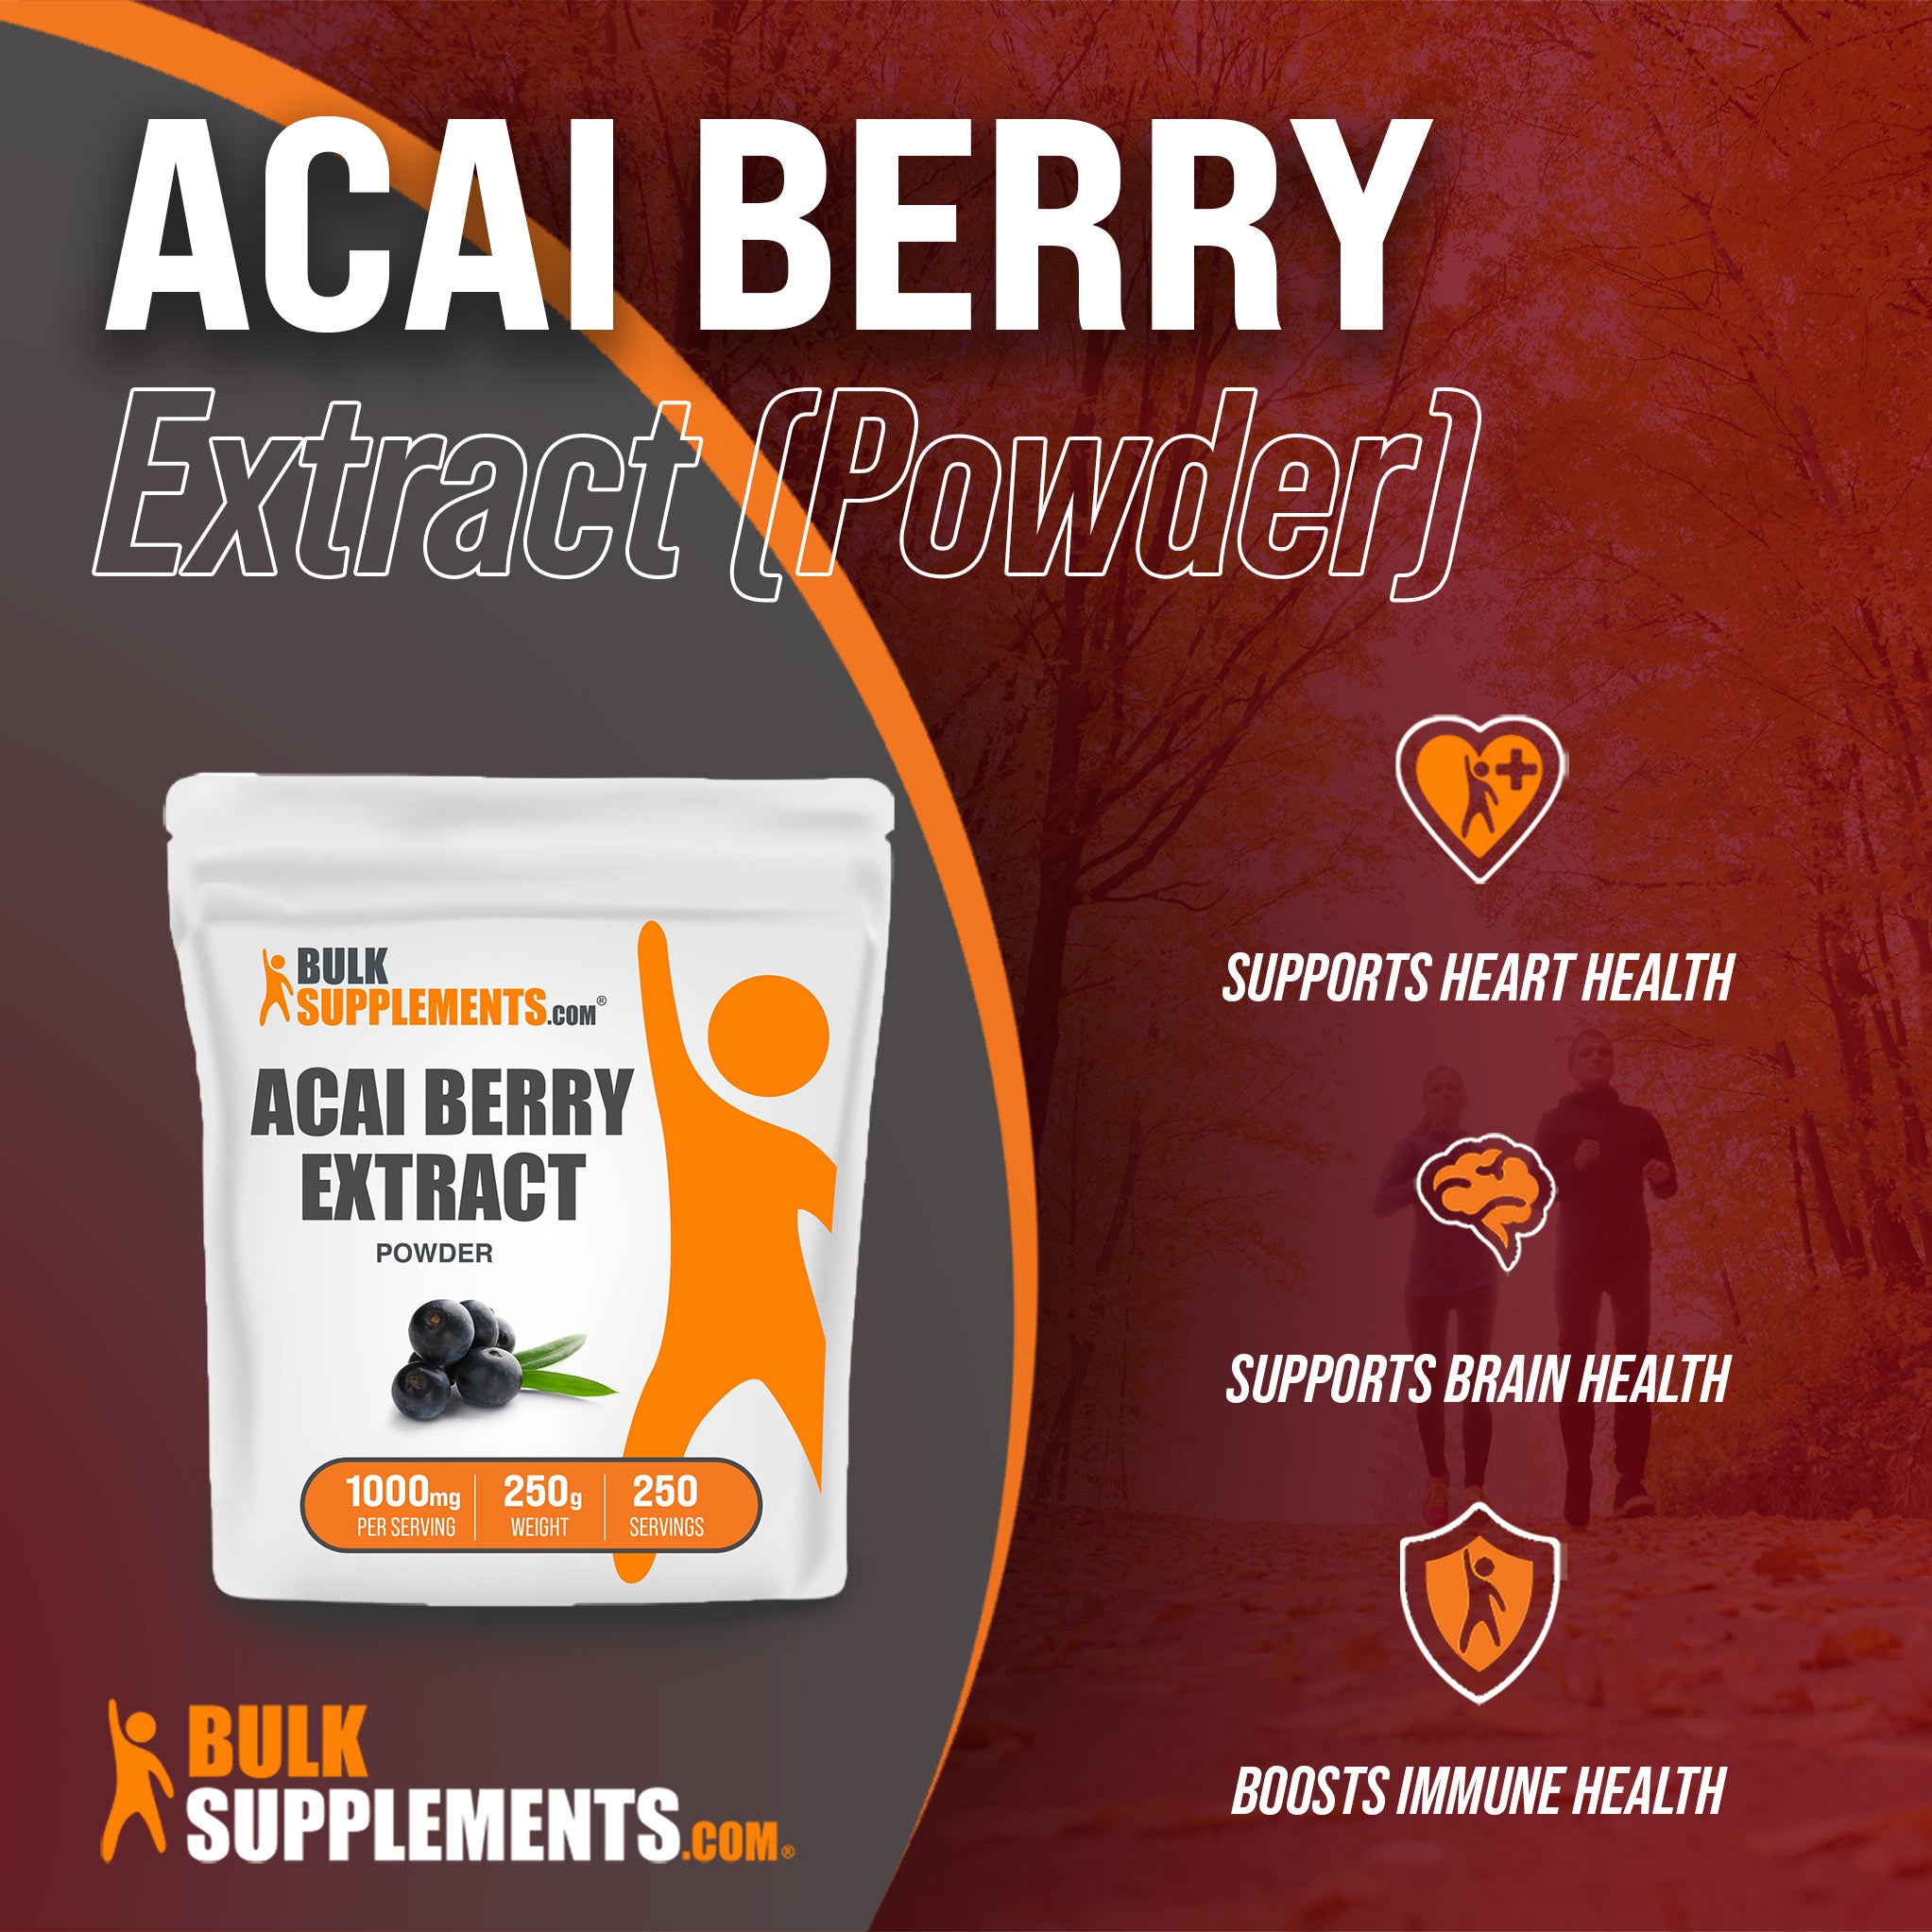 Acai Berry Smoothie Powder for heart, brain and immune health